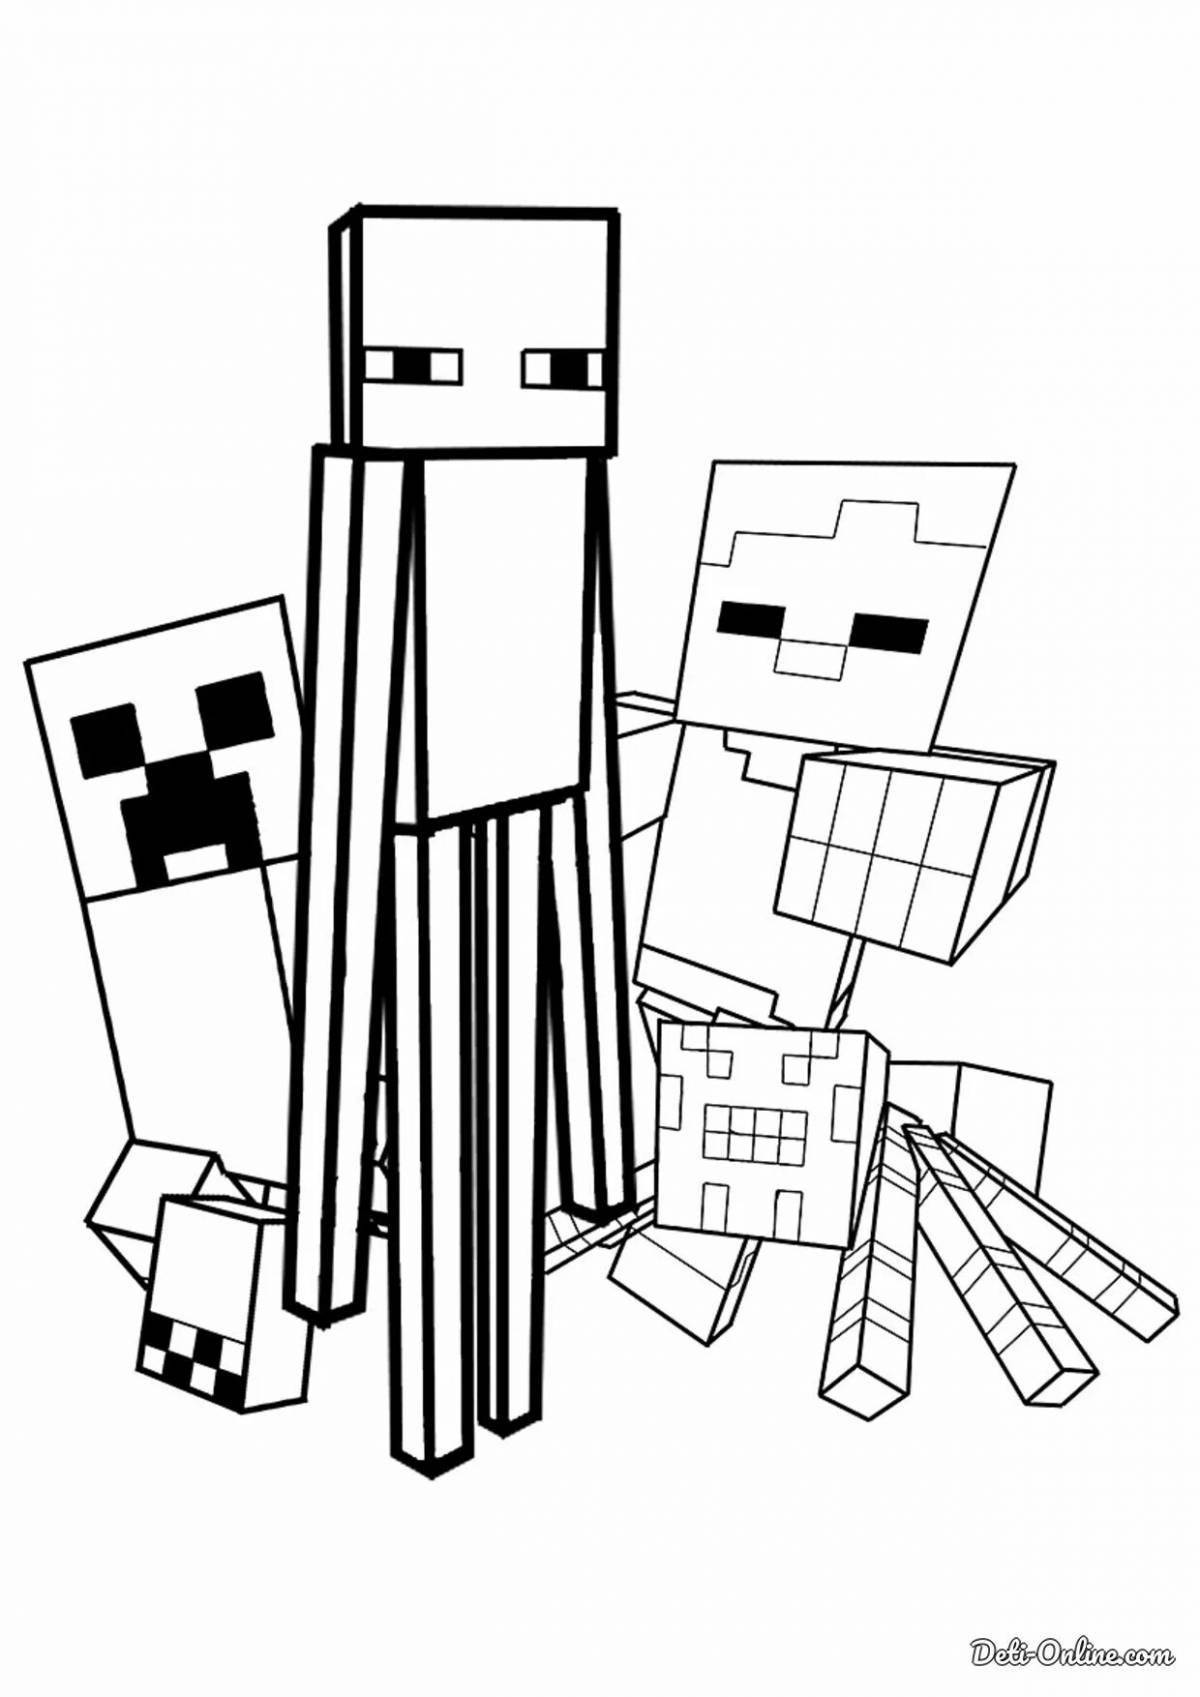 Coloring minecraft animated mobs